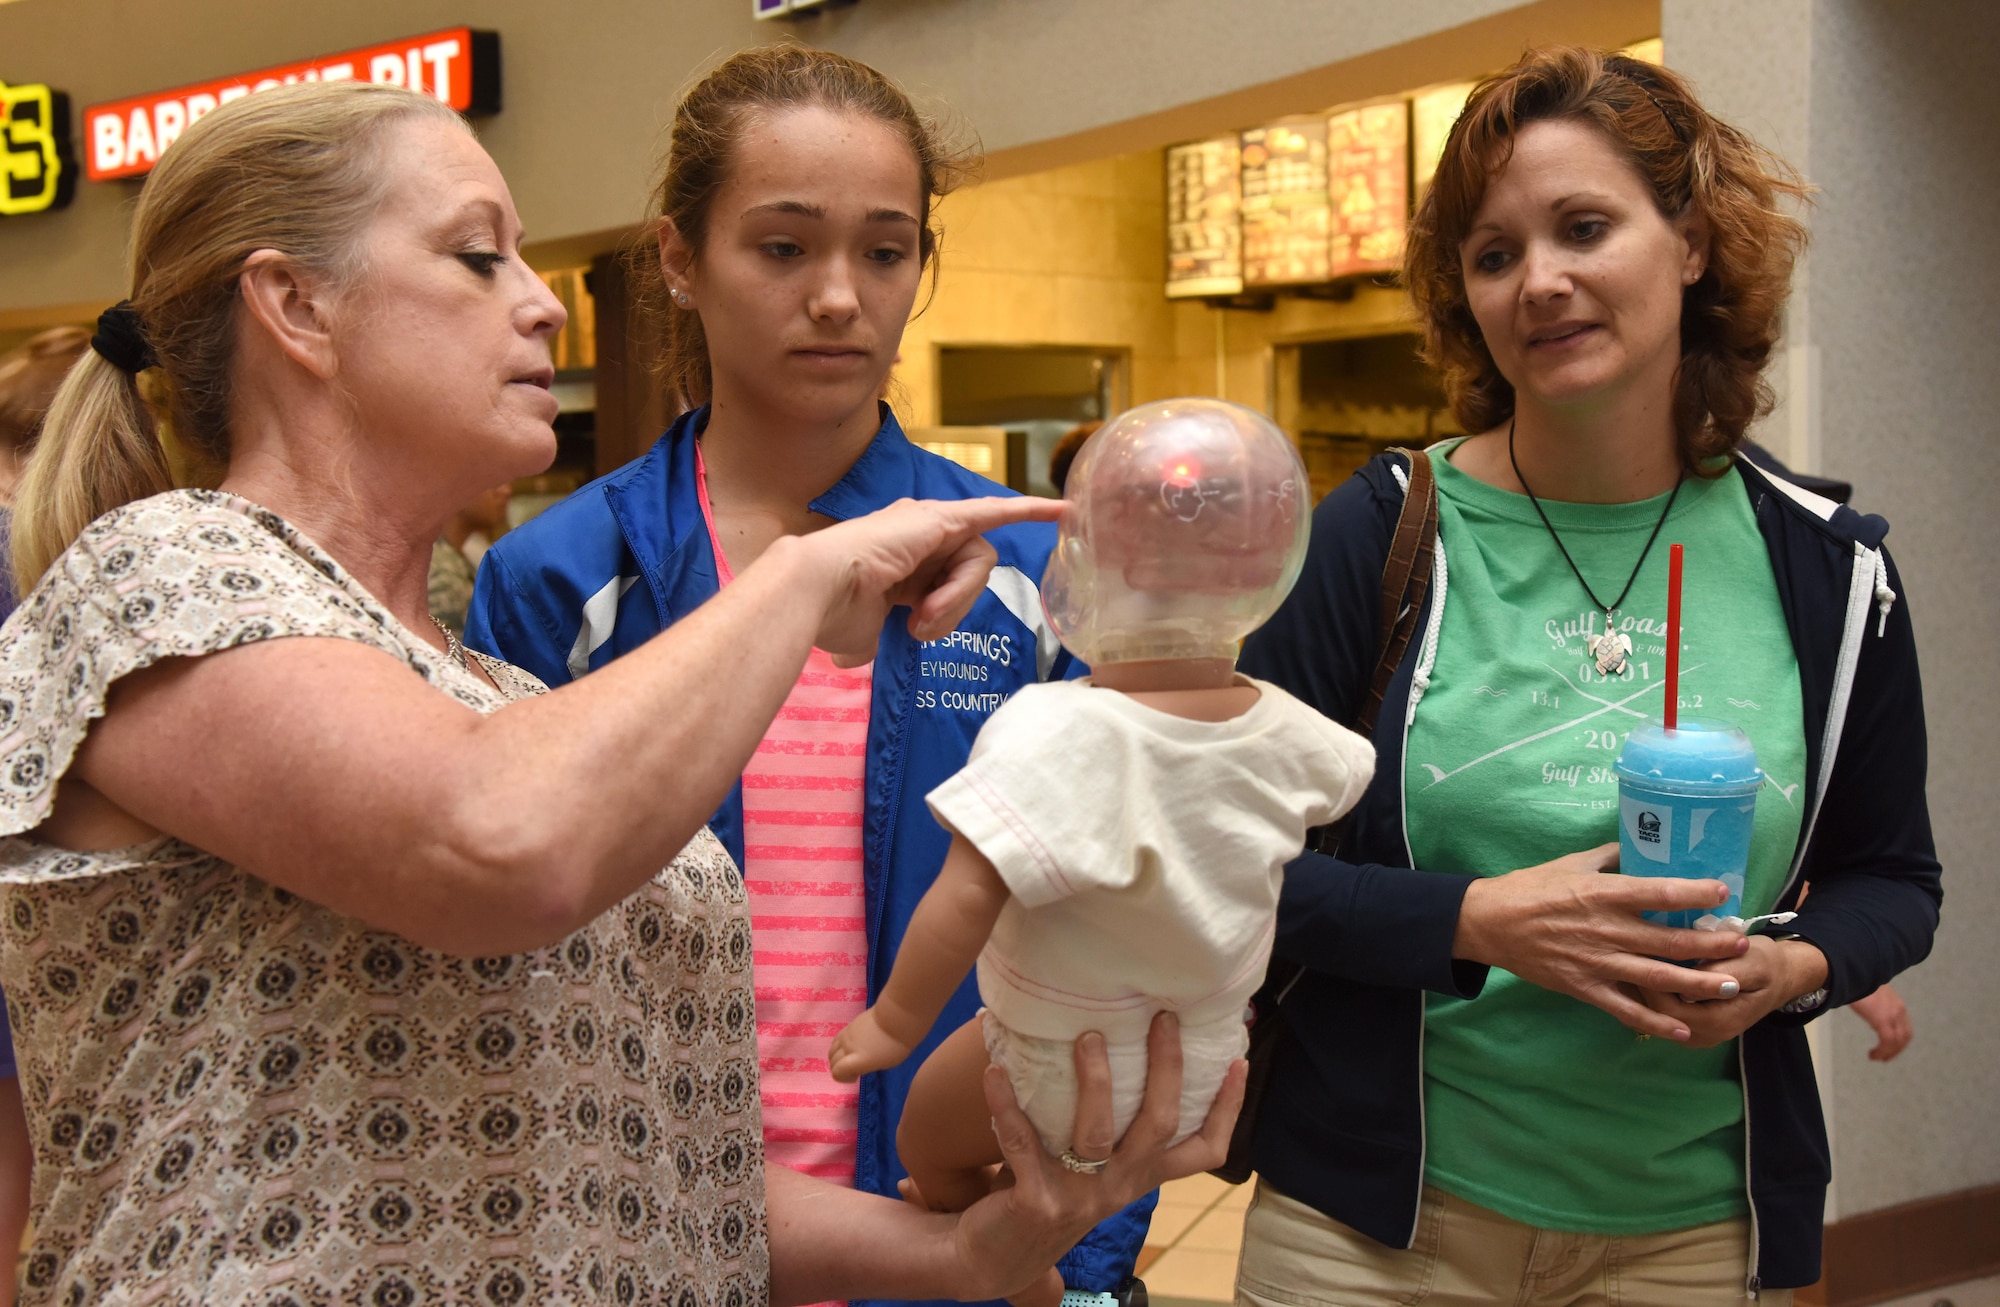 Paula Spooner, 81st Medical Operations Squadron family advocacy outreach manager, provides a shaken baby syndrome simulation to Isabelle and Lori Wheeler in the base exchange April 21, 2017, on Keesler Air Force Base, Miss. The family advocacy staff manned a booth with hand-outs and reading material about child abuse prevention for Keesler personnel in recognition of Child Abuse Prevention Month. (U.S. Air Force photo by Kemberly Groue)